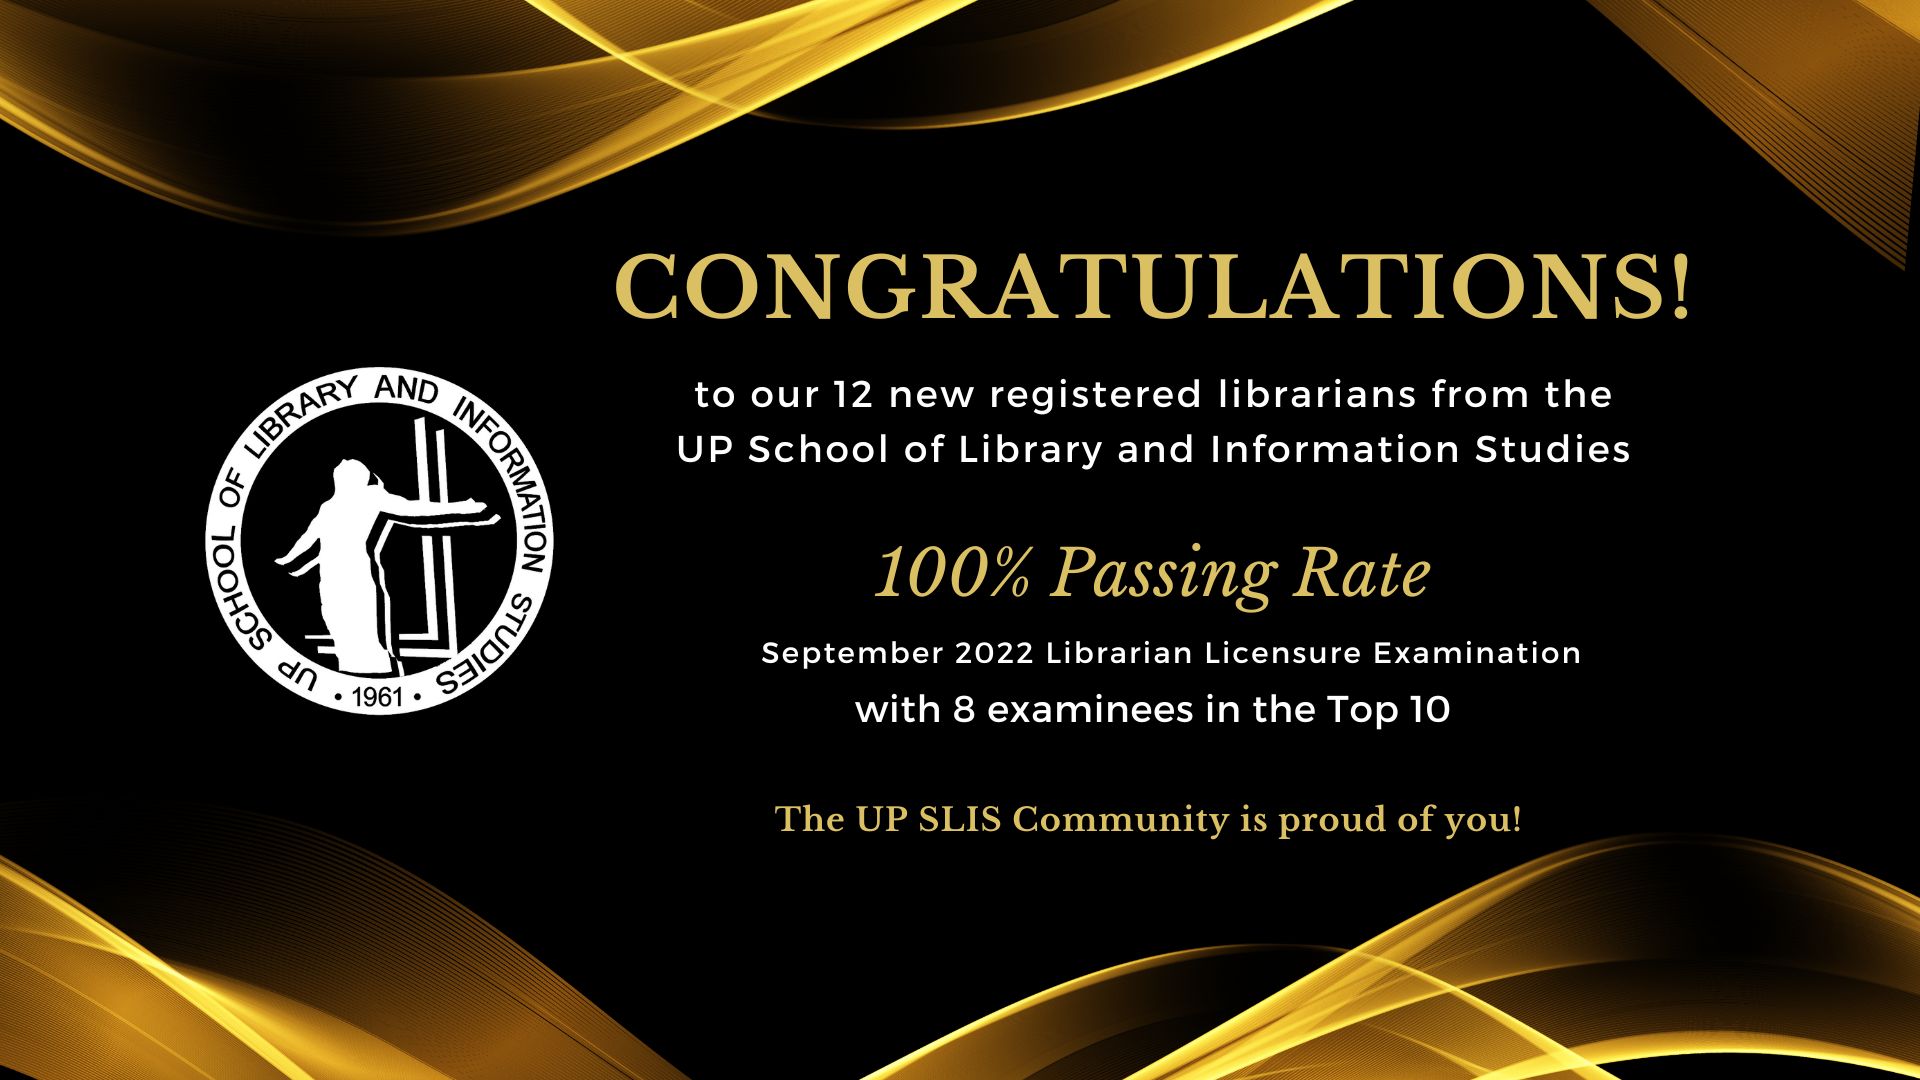 It's 100% passing for UP SLIS in the 2022 LLE!